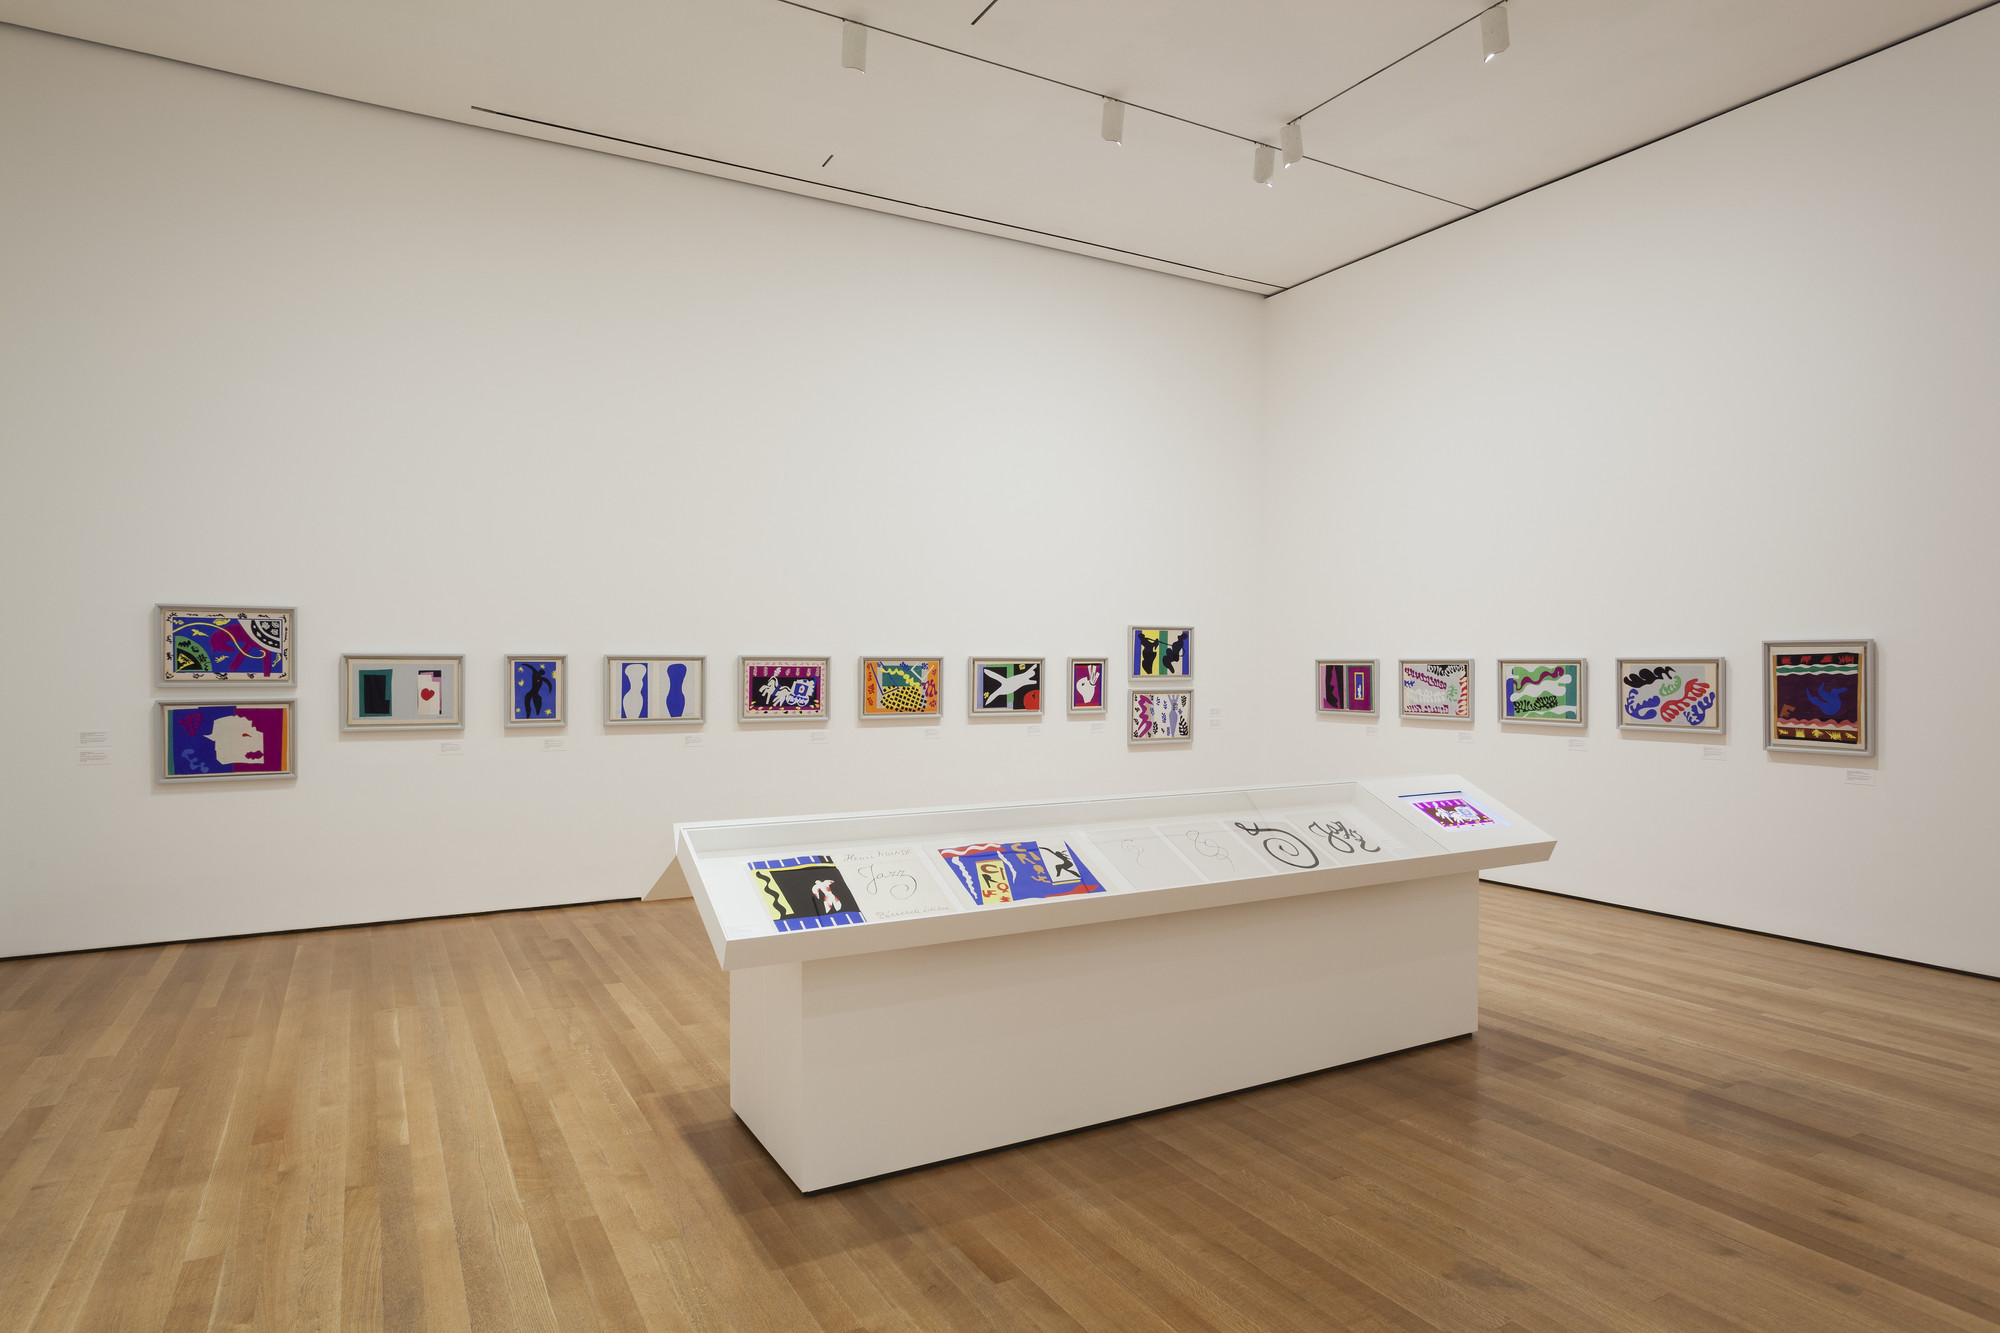 Installation view of the exhibition "Henri Matisse The CutOuts" MoMA